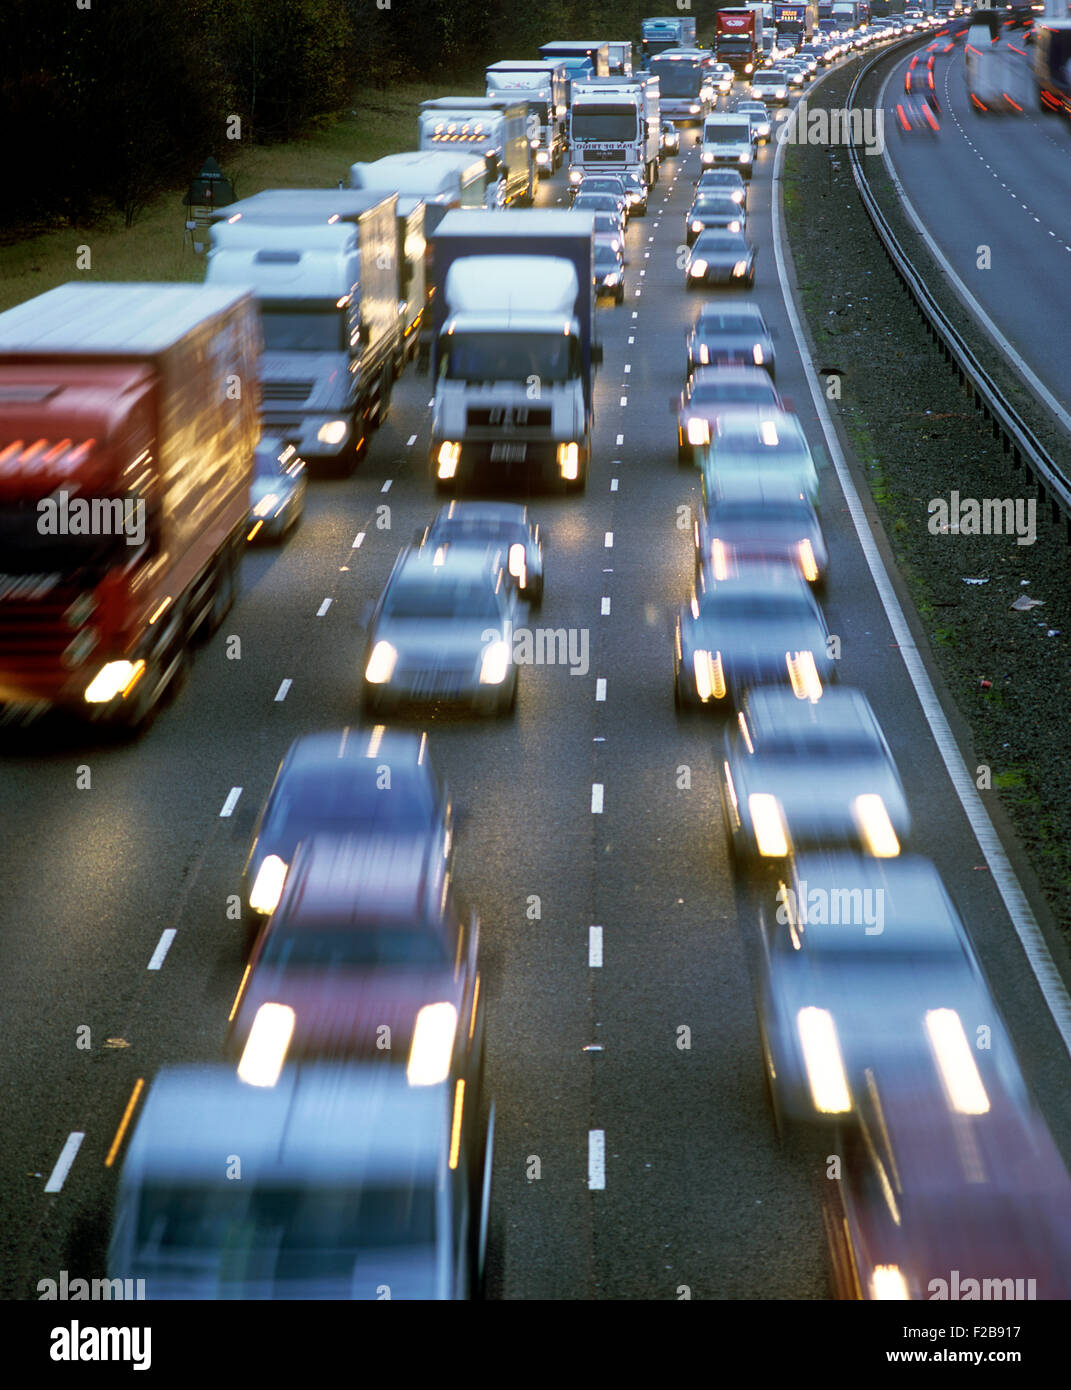 Bumper-to-bumper, nose-to-tail heavy traffic on a motorway in poor light.. Stock Photo